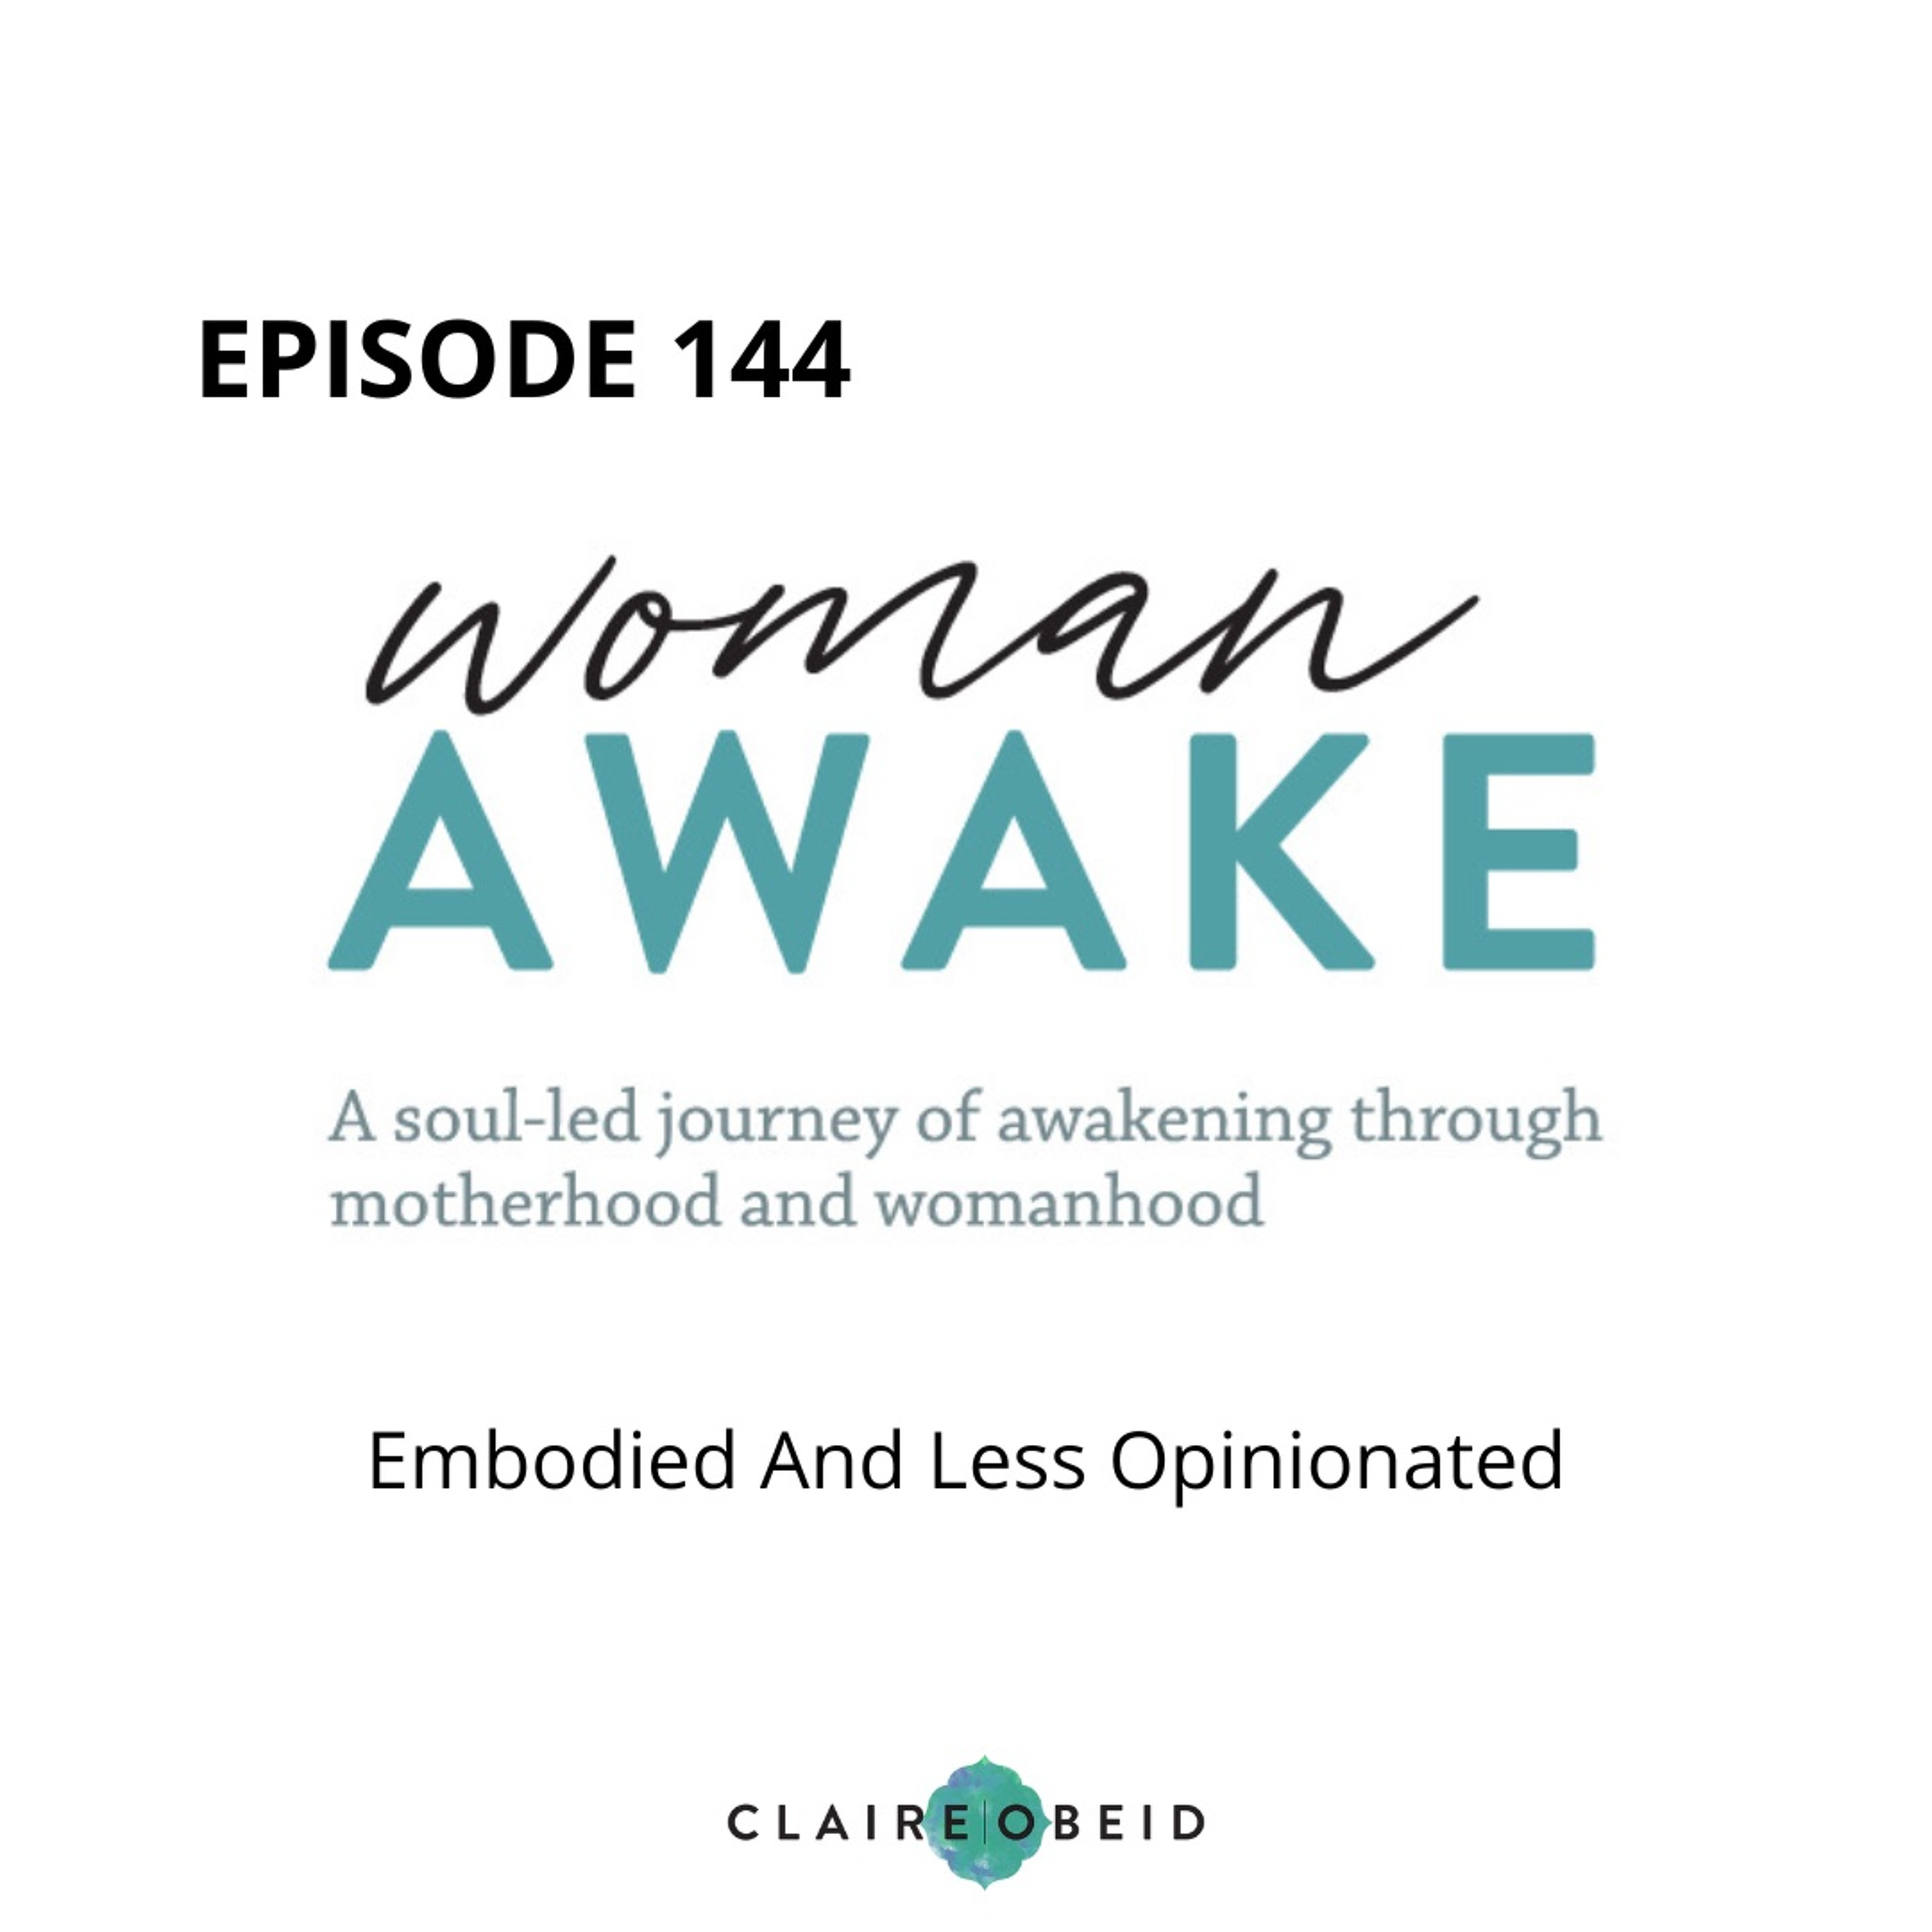 Woman Awake: Episode 144 - Embodied And Less Opinionated